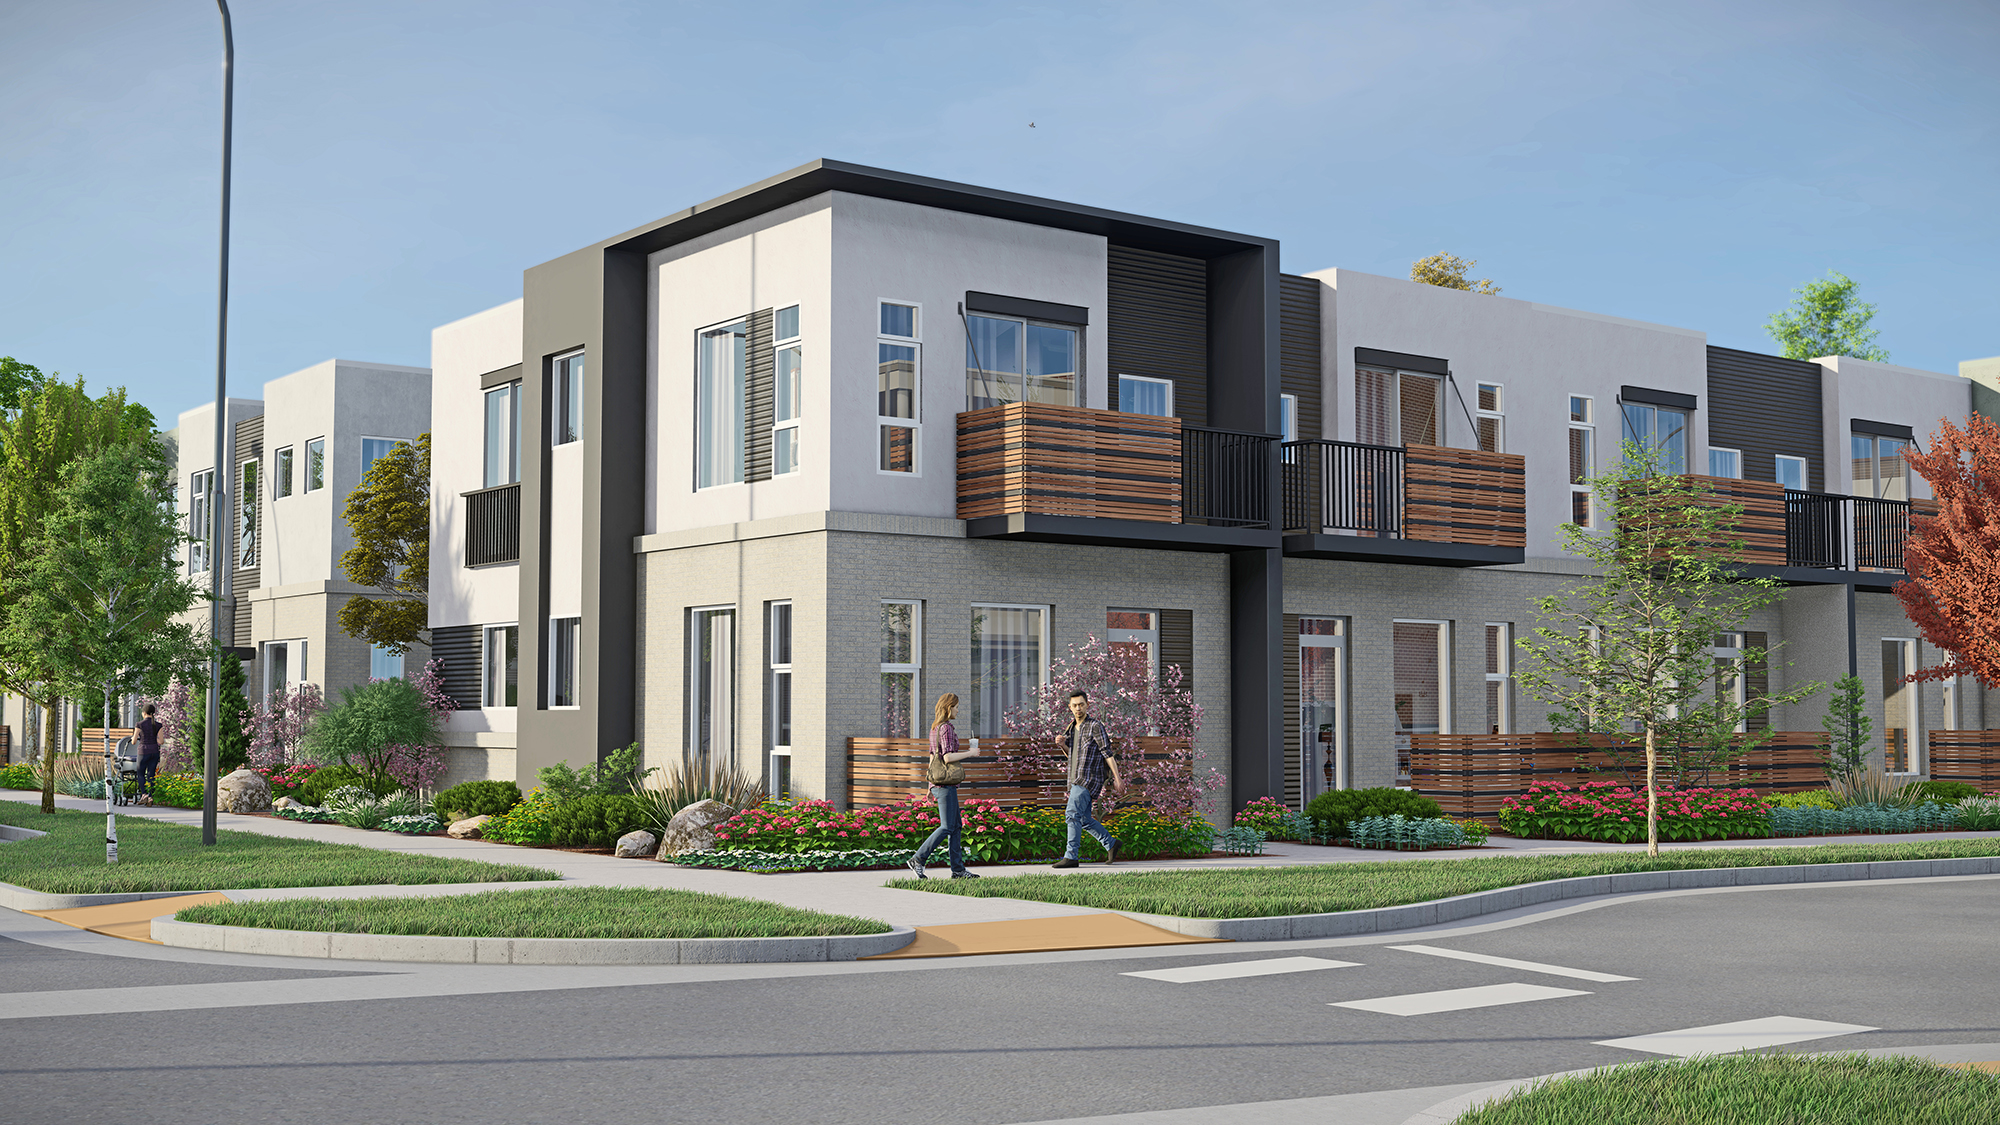 Rendering of Corner exterior of two storey apartments with balconies